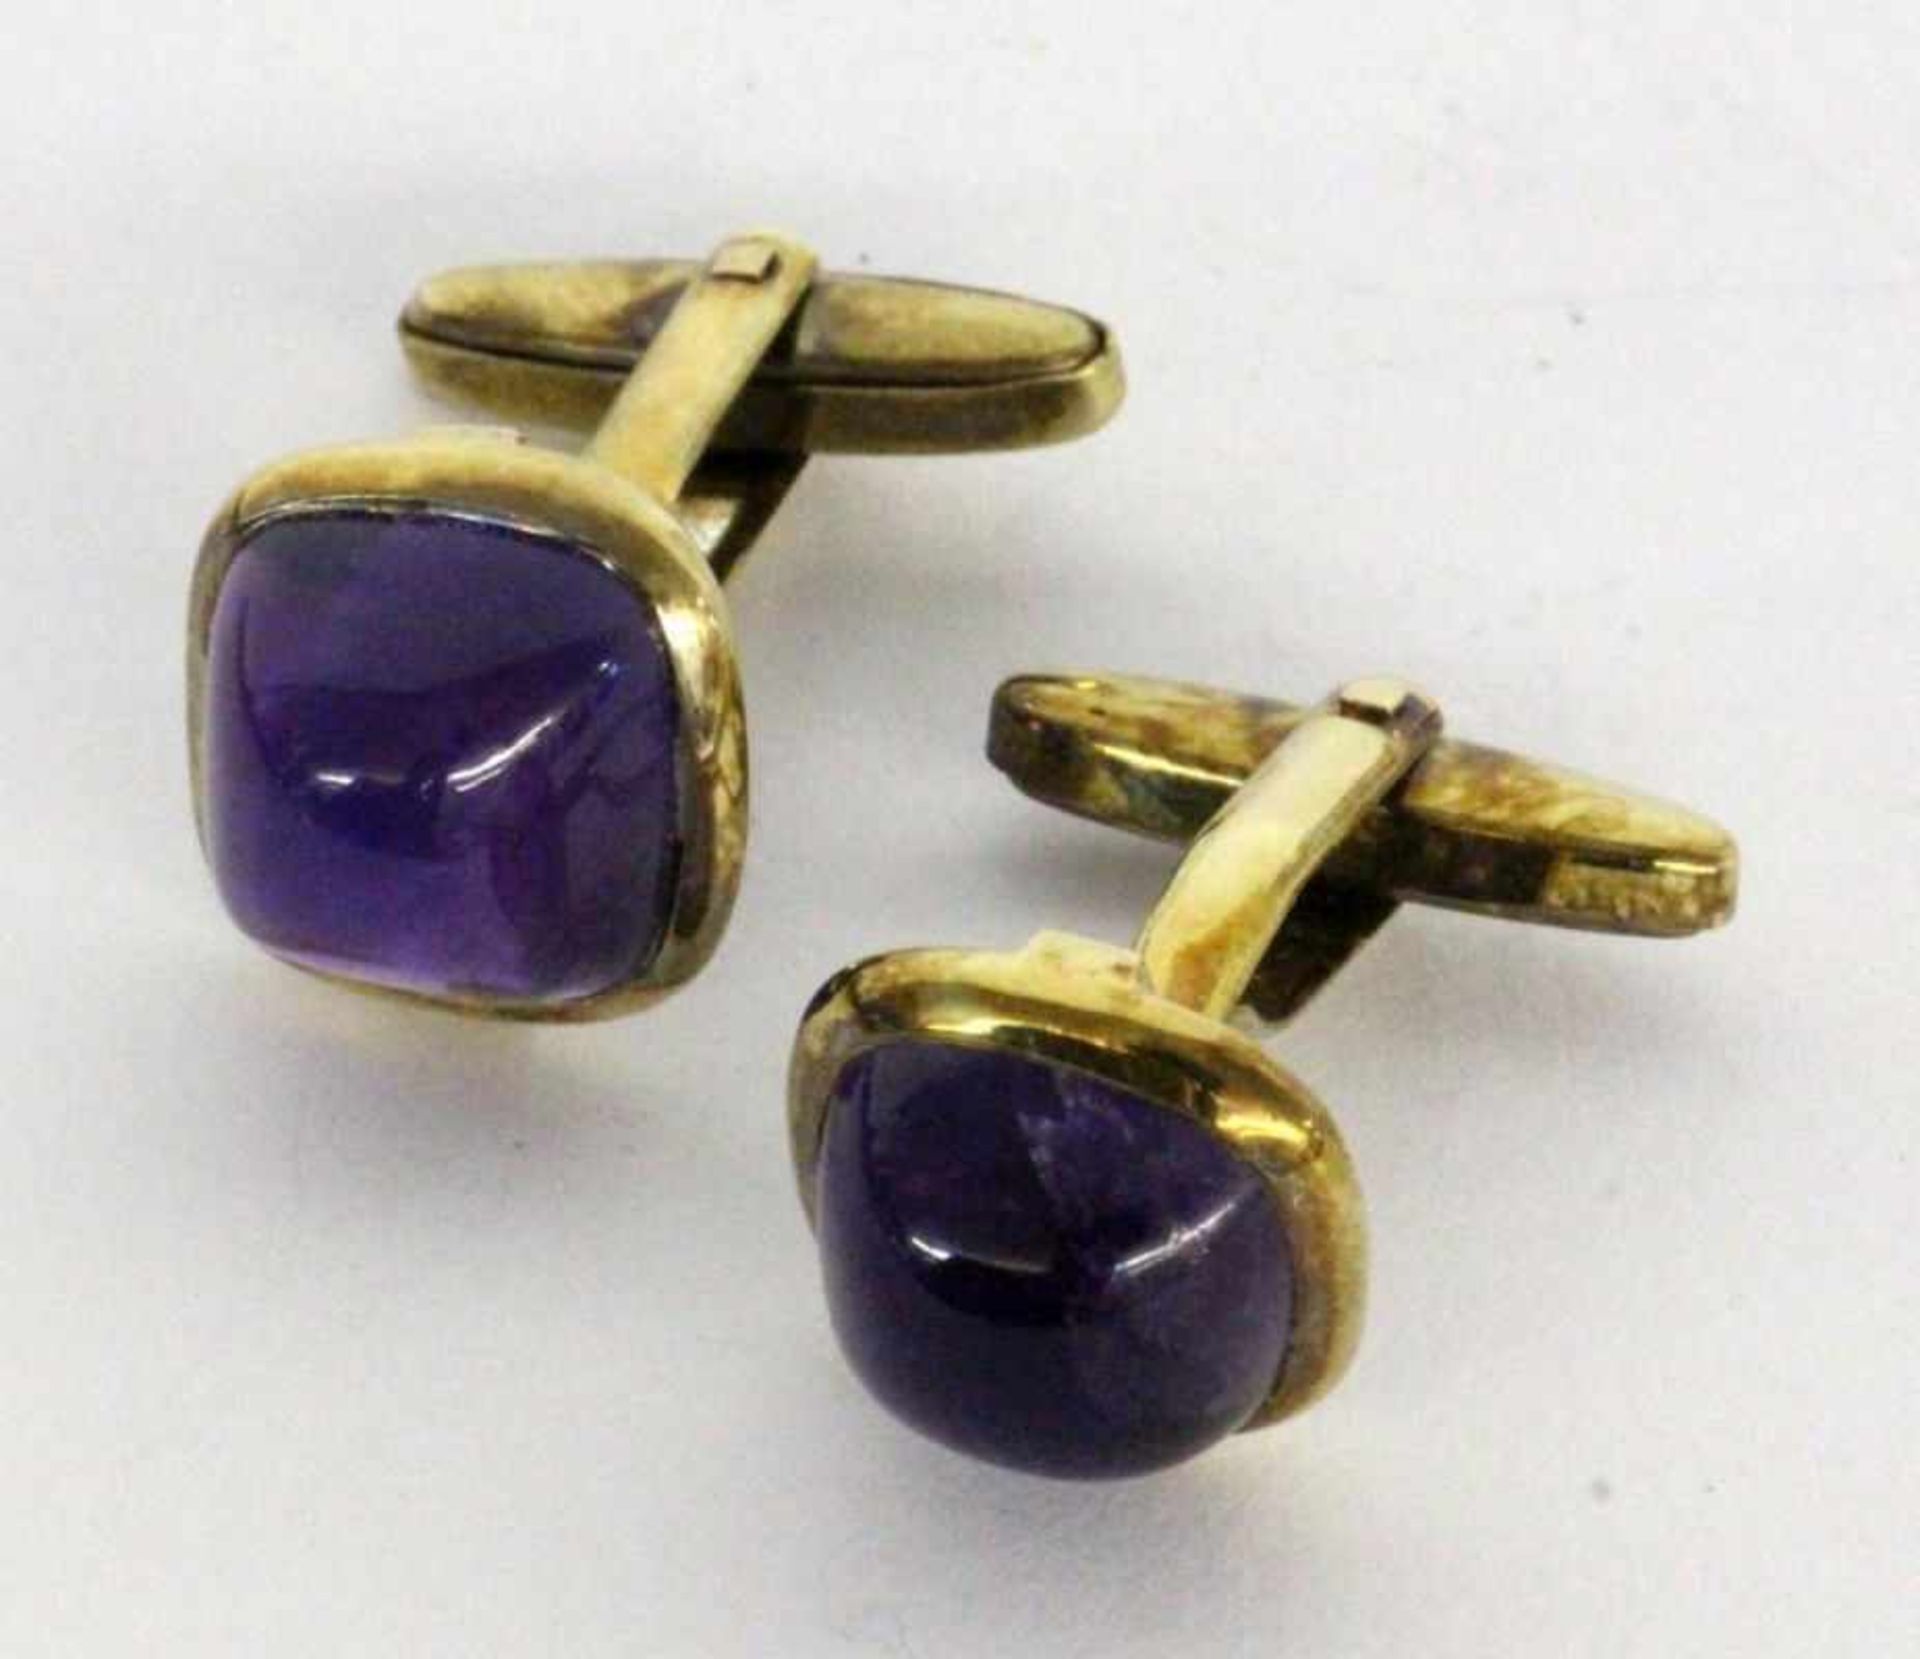 ''A PAIR OF CUFFLINKS 585/000 yellow gold with amethyst cabochons. Gross weight approx. 9.7